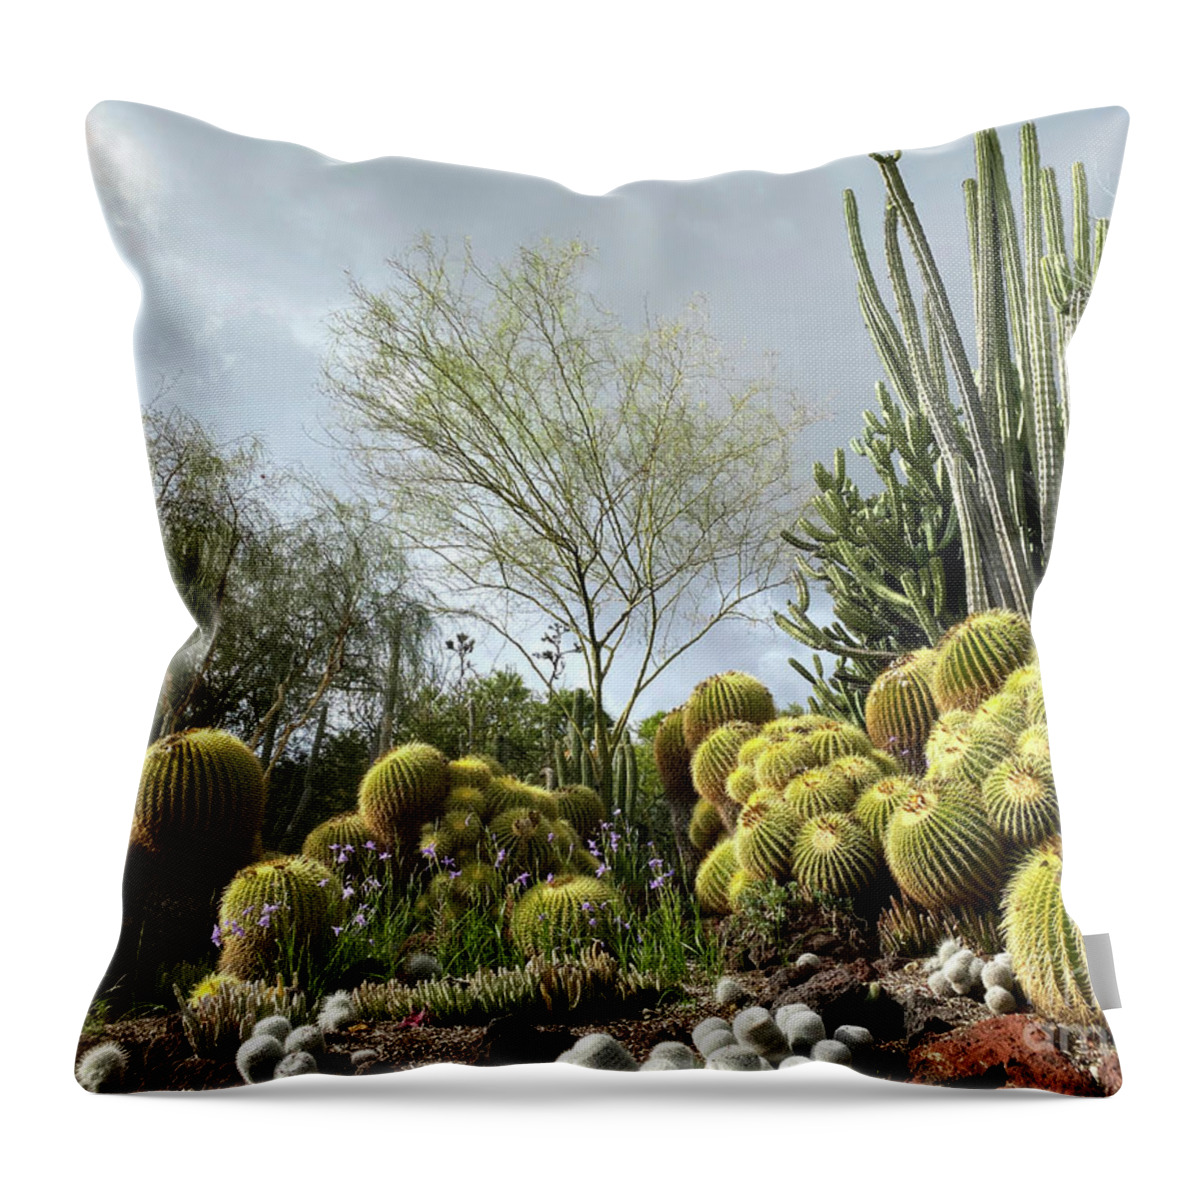 Clouds Throw Pillow featuring the photograph Cactus Garden with Cloudy Sky by Katherine Erickson